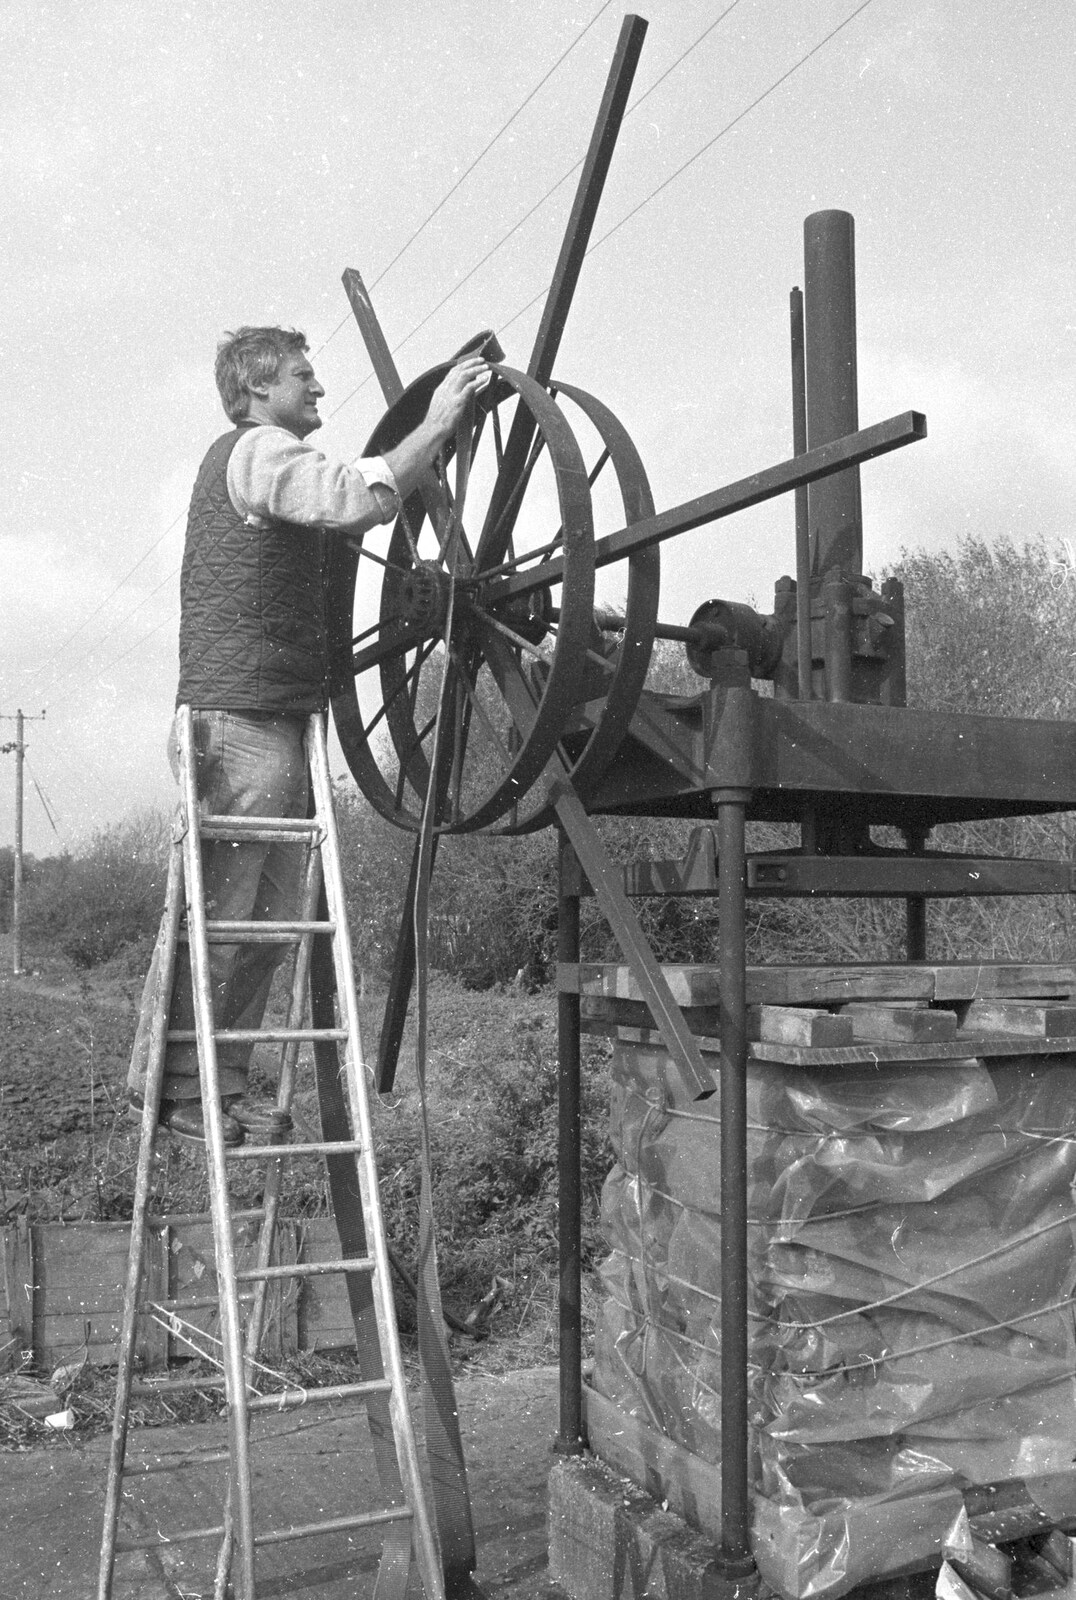 Geoff straps up the drive belt from Cider Making in Black and White, Stuston, Suffolk - 11th October 1992